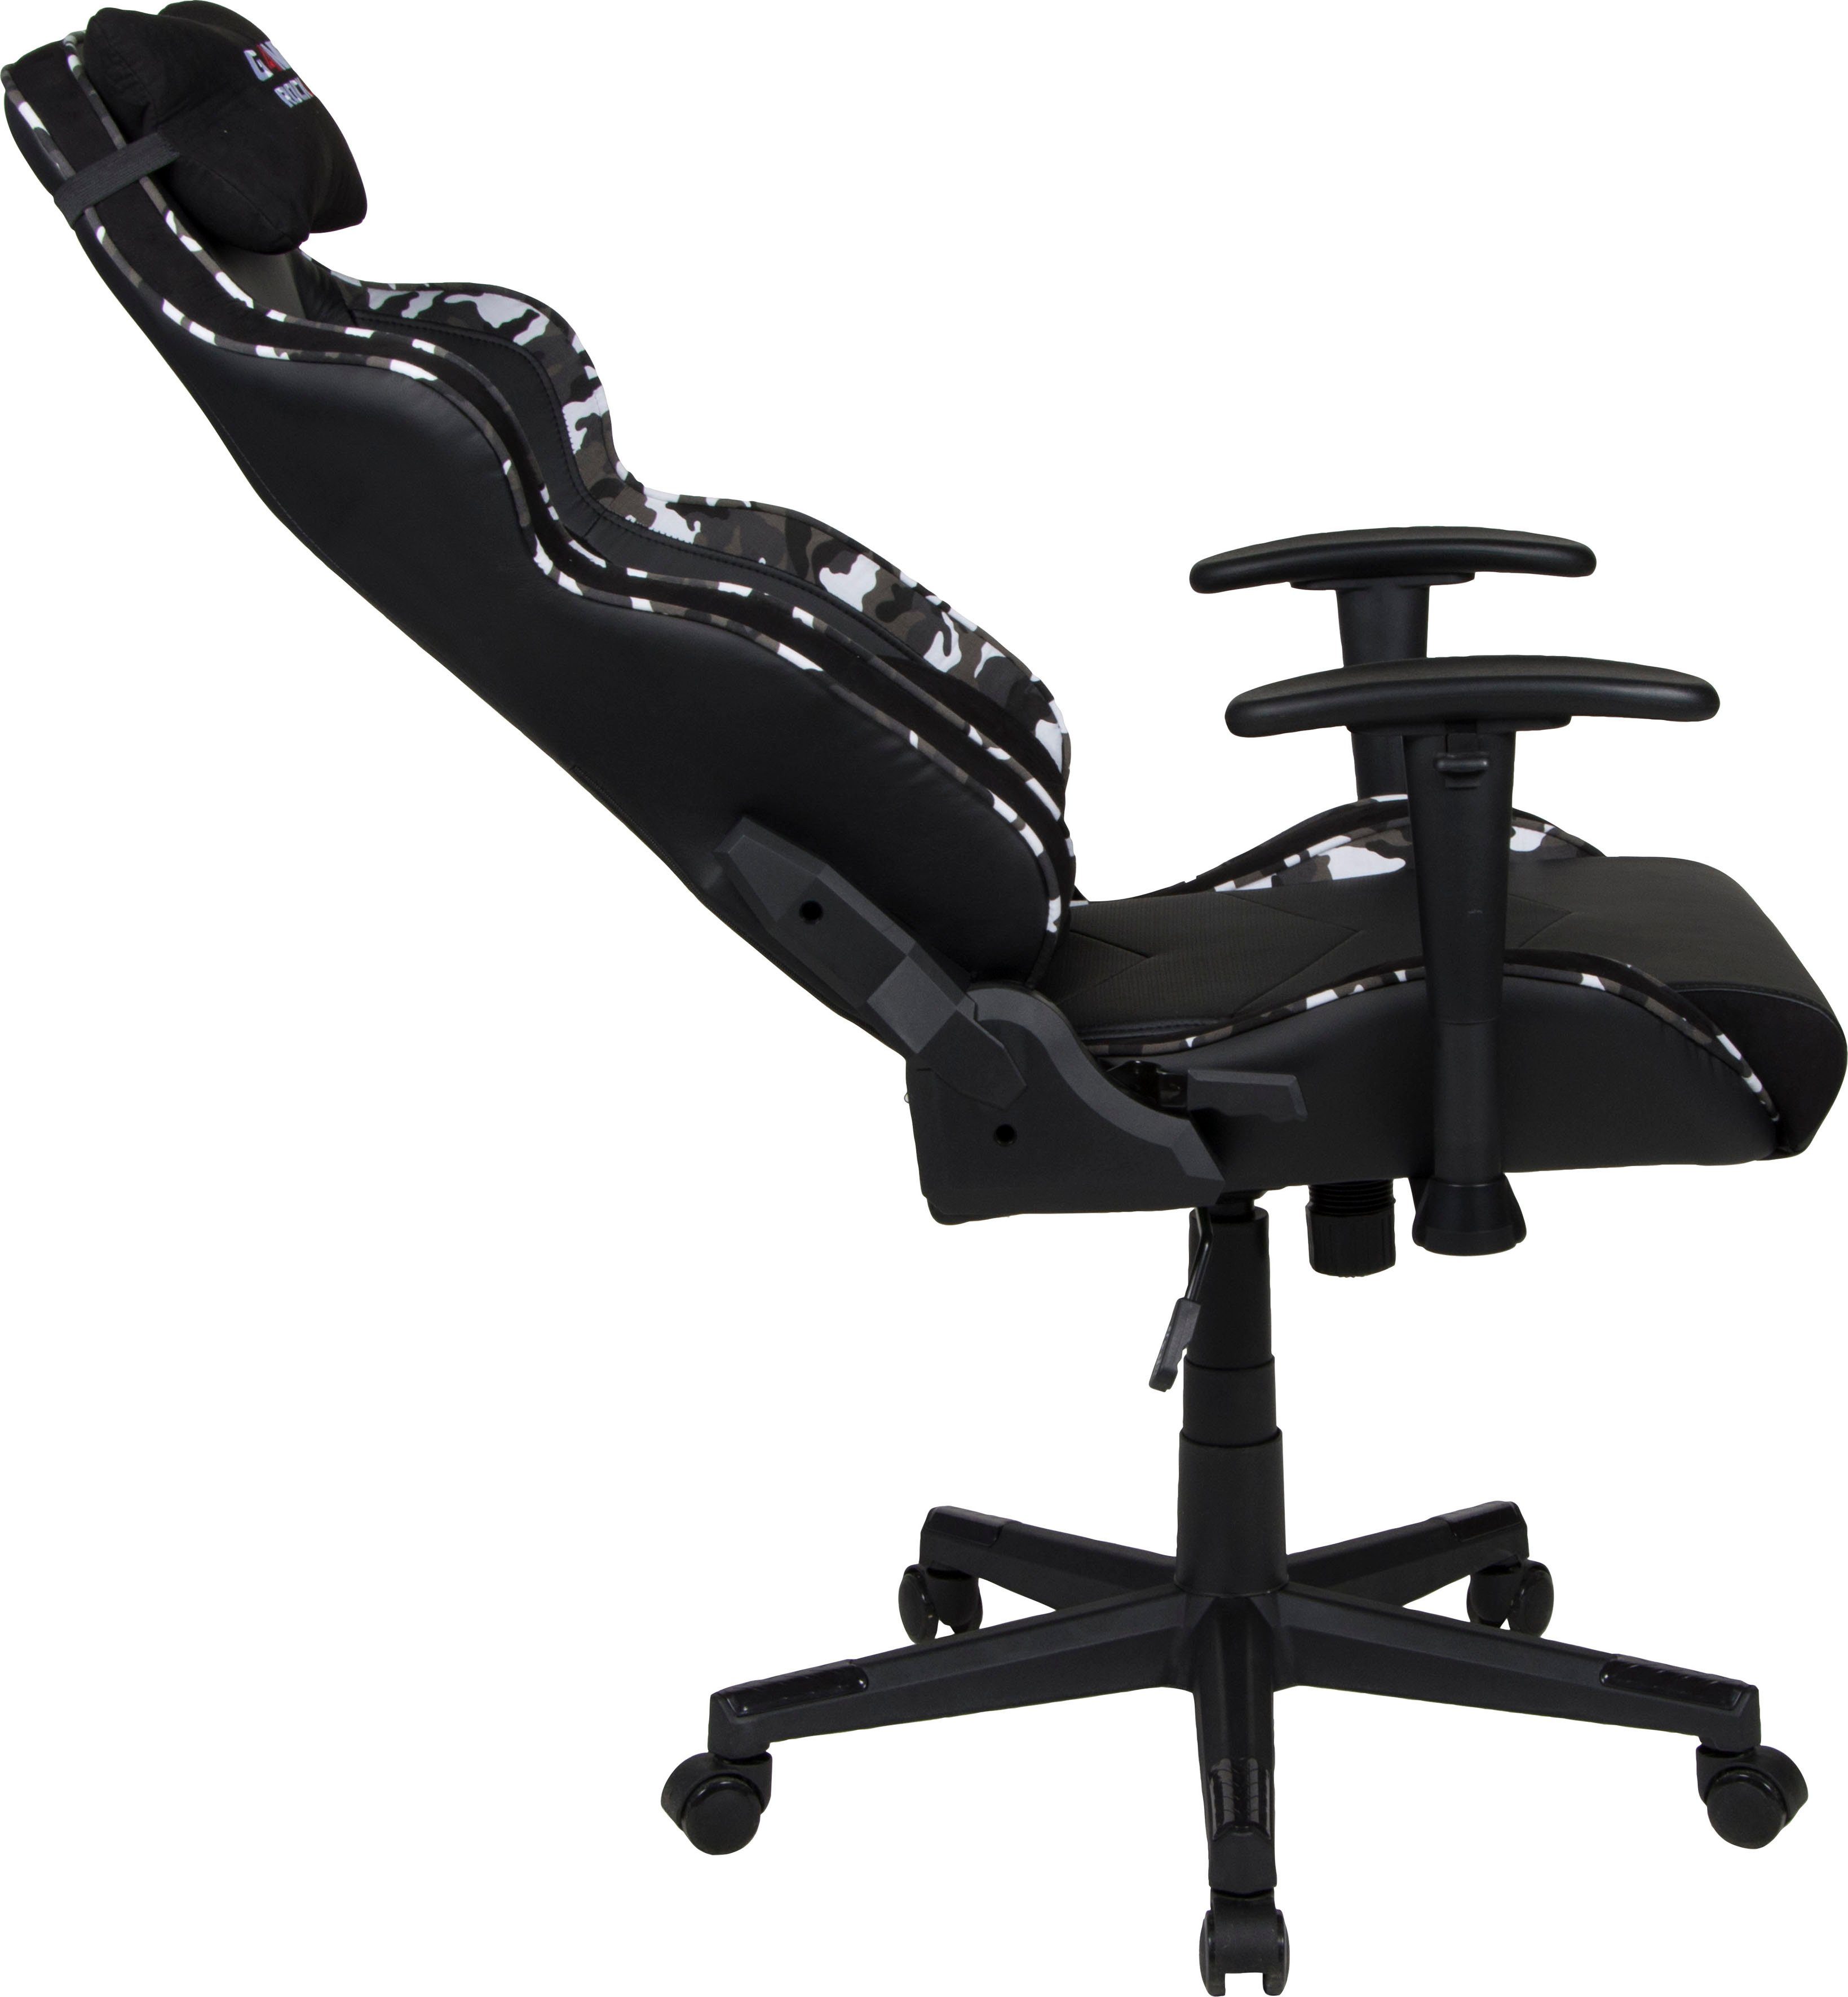 Collection in Chair schwarz/camouflage G-30, Optik Gaming Game-Rocker Duo Chefsessel grau Camouflage